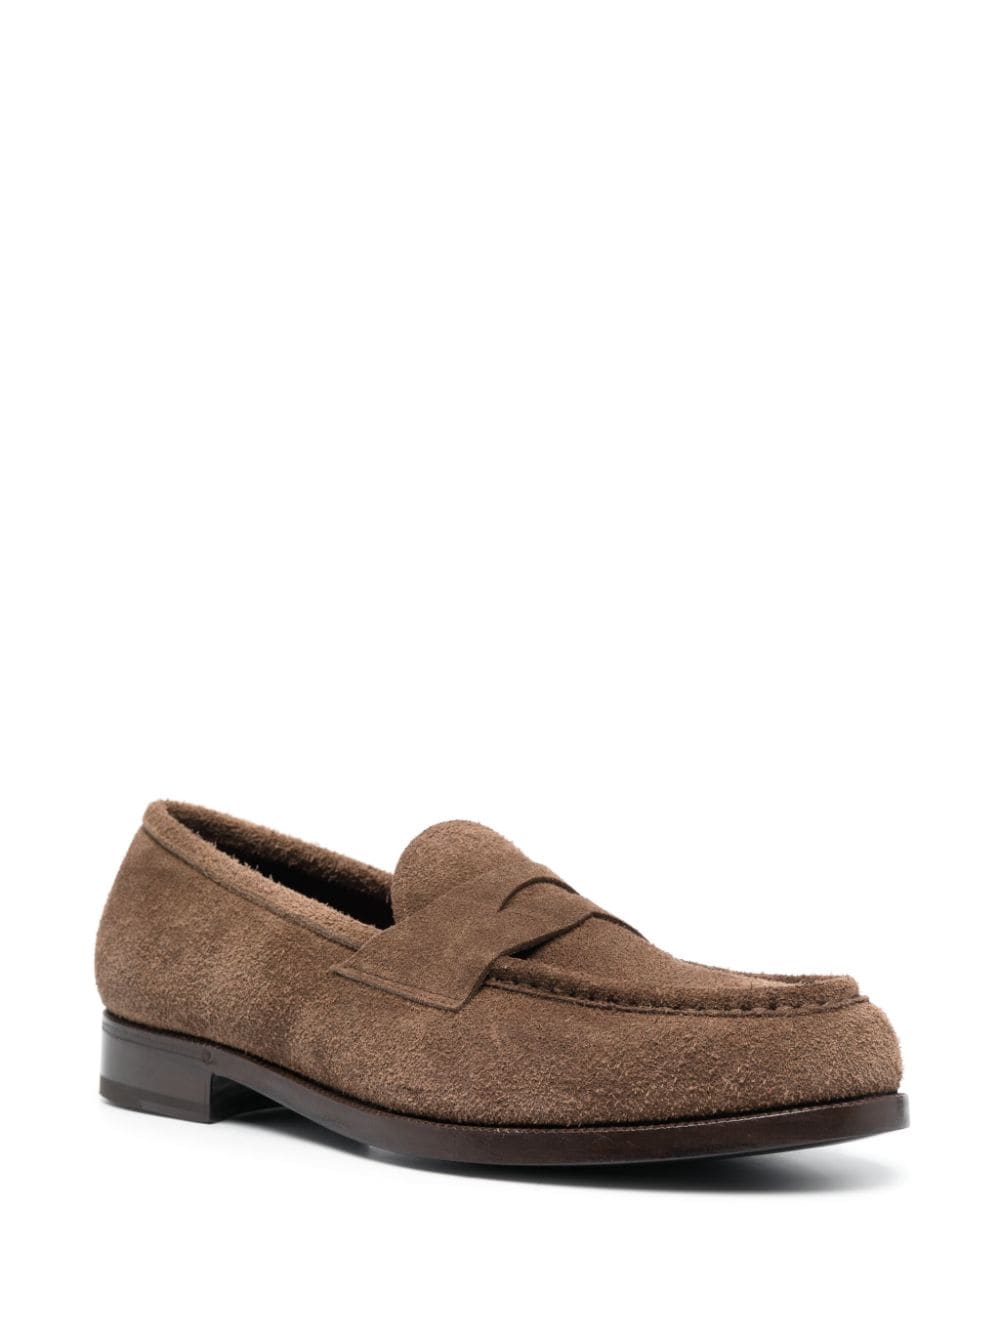 Image 2 of Lidfort suede penny loafers